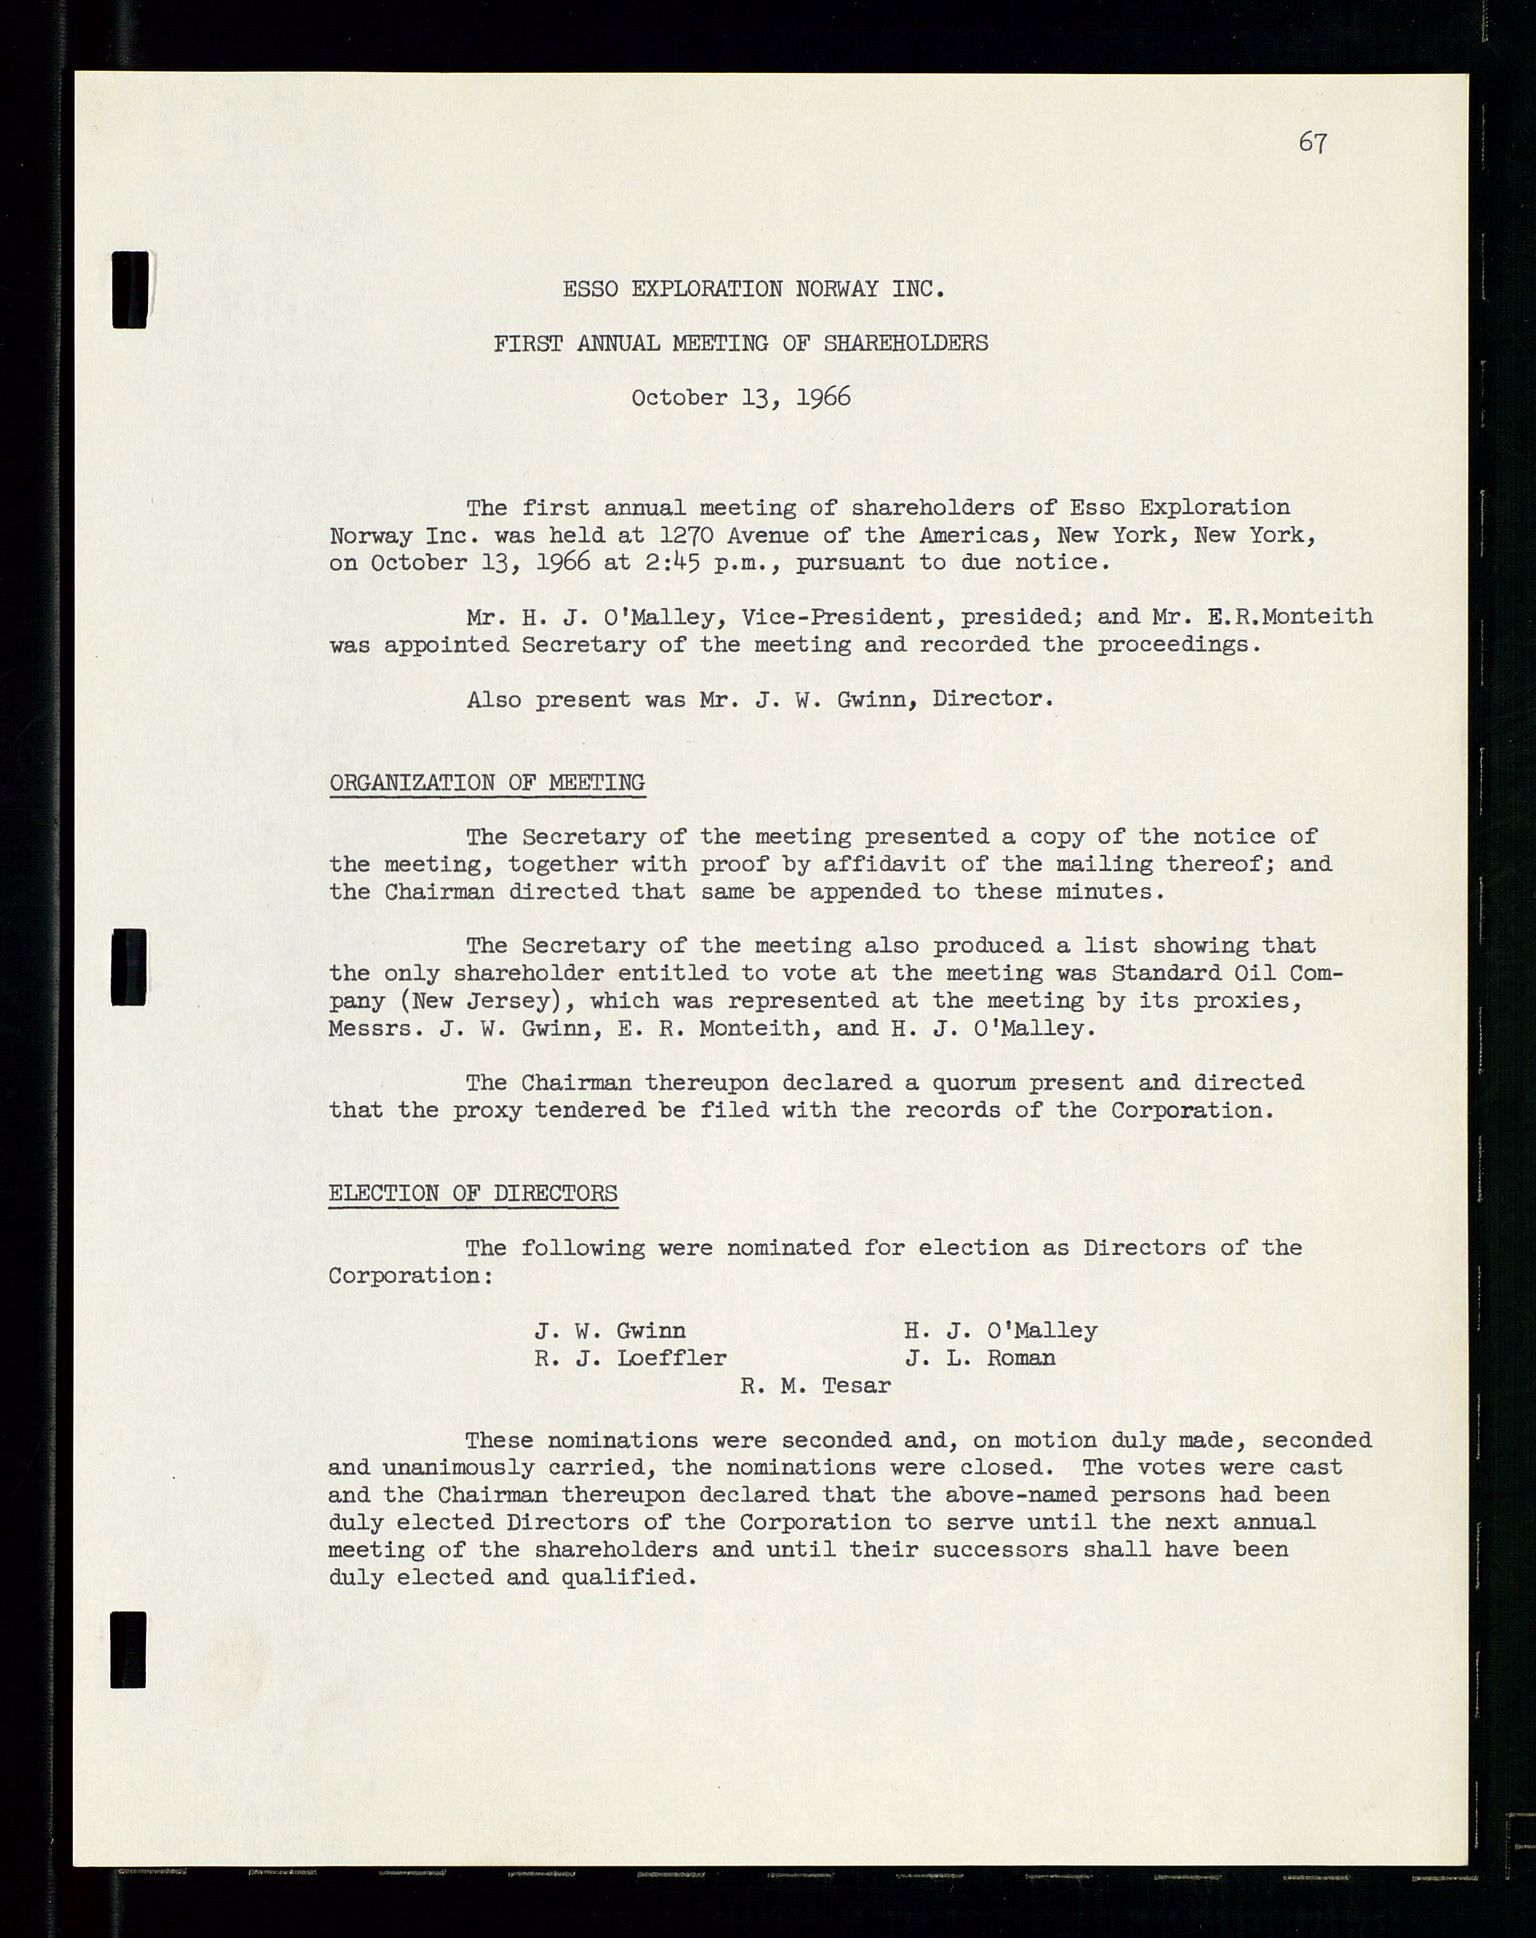 Pa 1512 - Esso Exploration and Production Norway Inc., SAST/A-101917/A/Aa/L0001/0001: Styredokumenter / Corporate records, By-Laws, Board meeting minutes, Incorporations, 1965-1975, s. 67